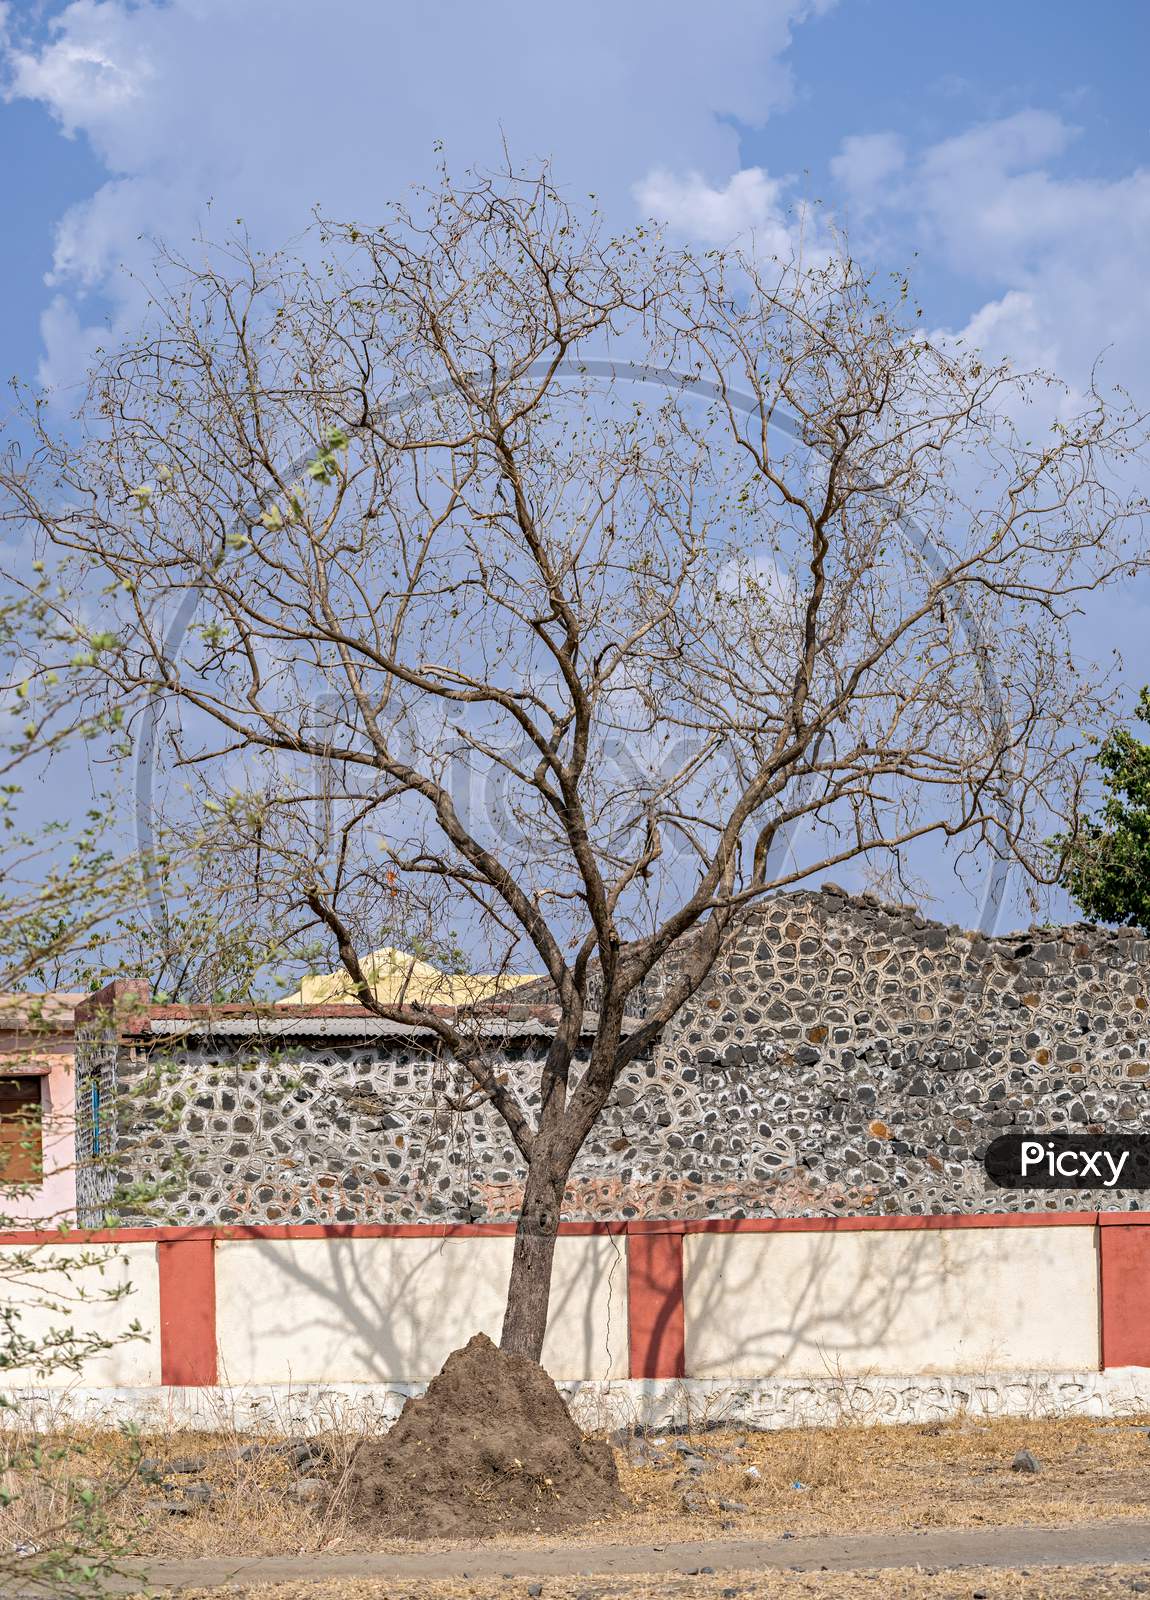 A Dry Tree & House Of Ants In Village In Pune, Maharashtra, India During Summer.